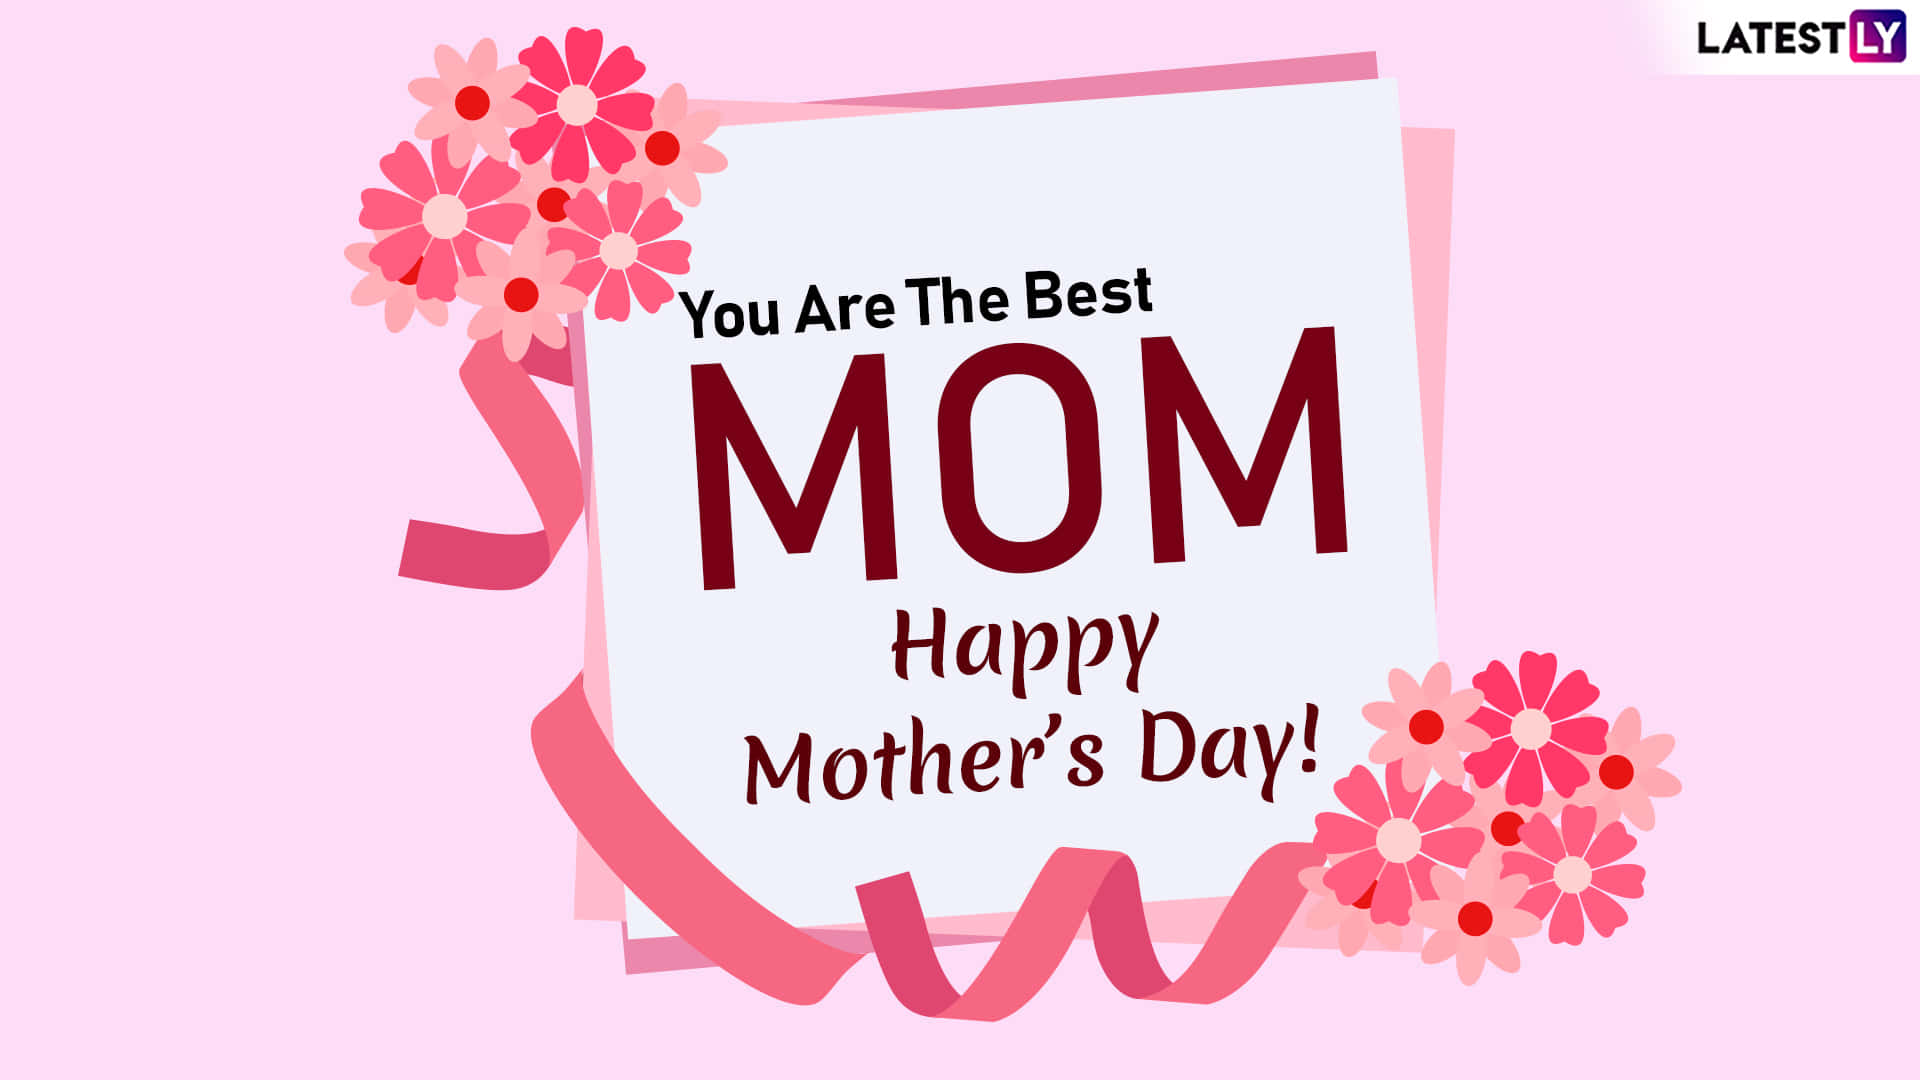 Happy Mother's Day Wishes For Mom Wallpaper